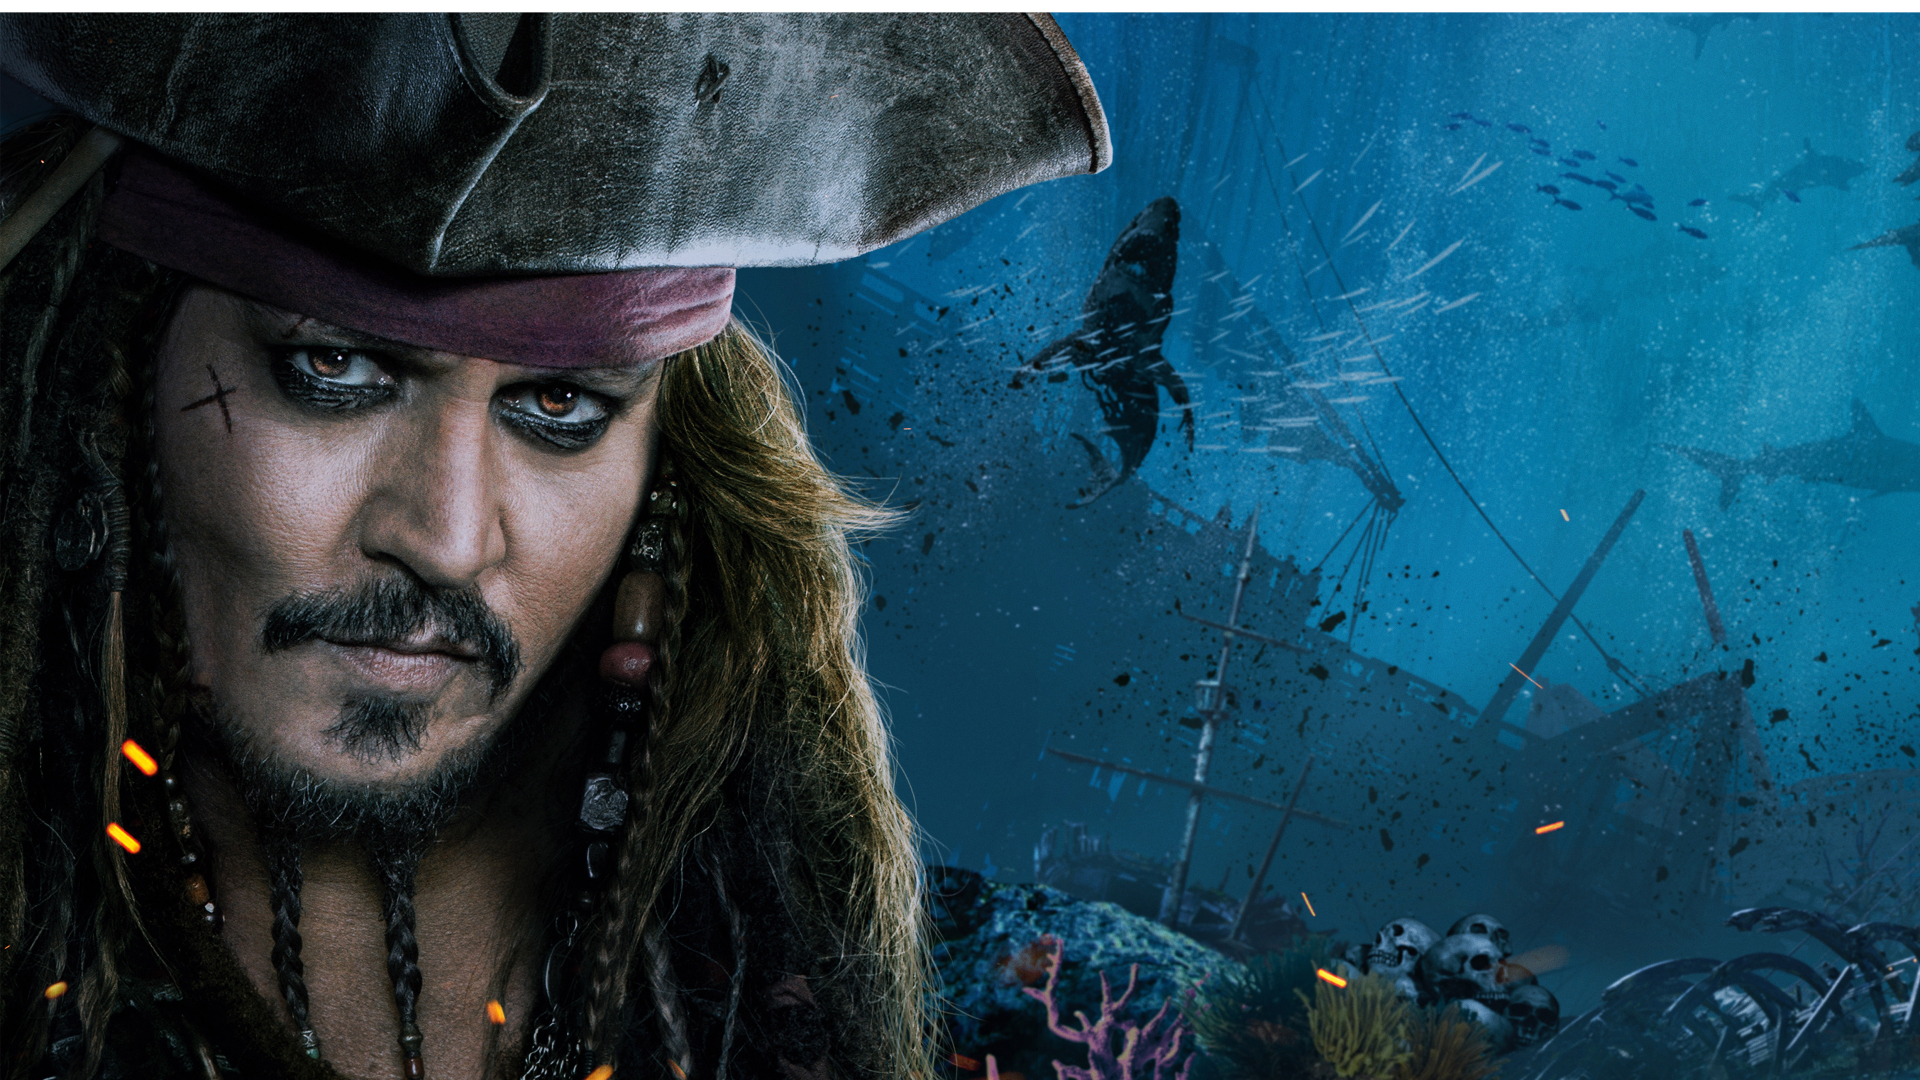 SIGNOOGLE Caption Jack Sparrow Poster Johnny Depp Pirates Of The Caribbean  Wall Quotes Movie Actor Wallpaper For Living Kids Study Bedroom Home Room  16 x 12 Inches : Amazon.in: Home & Kitchen